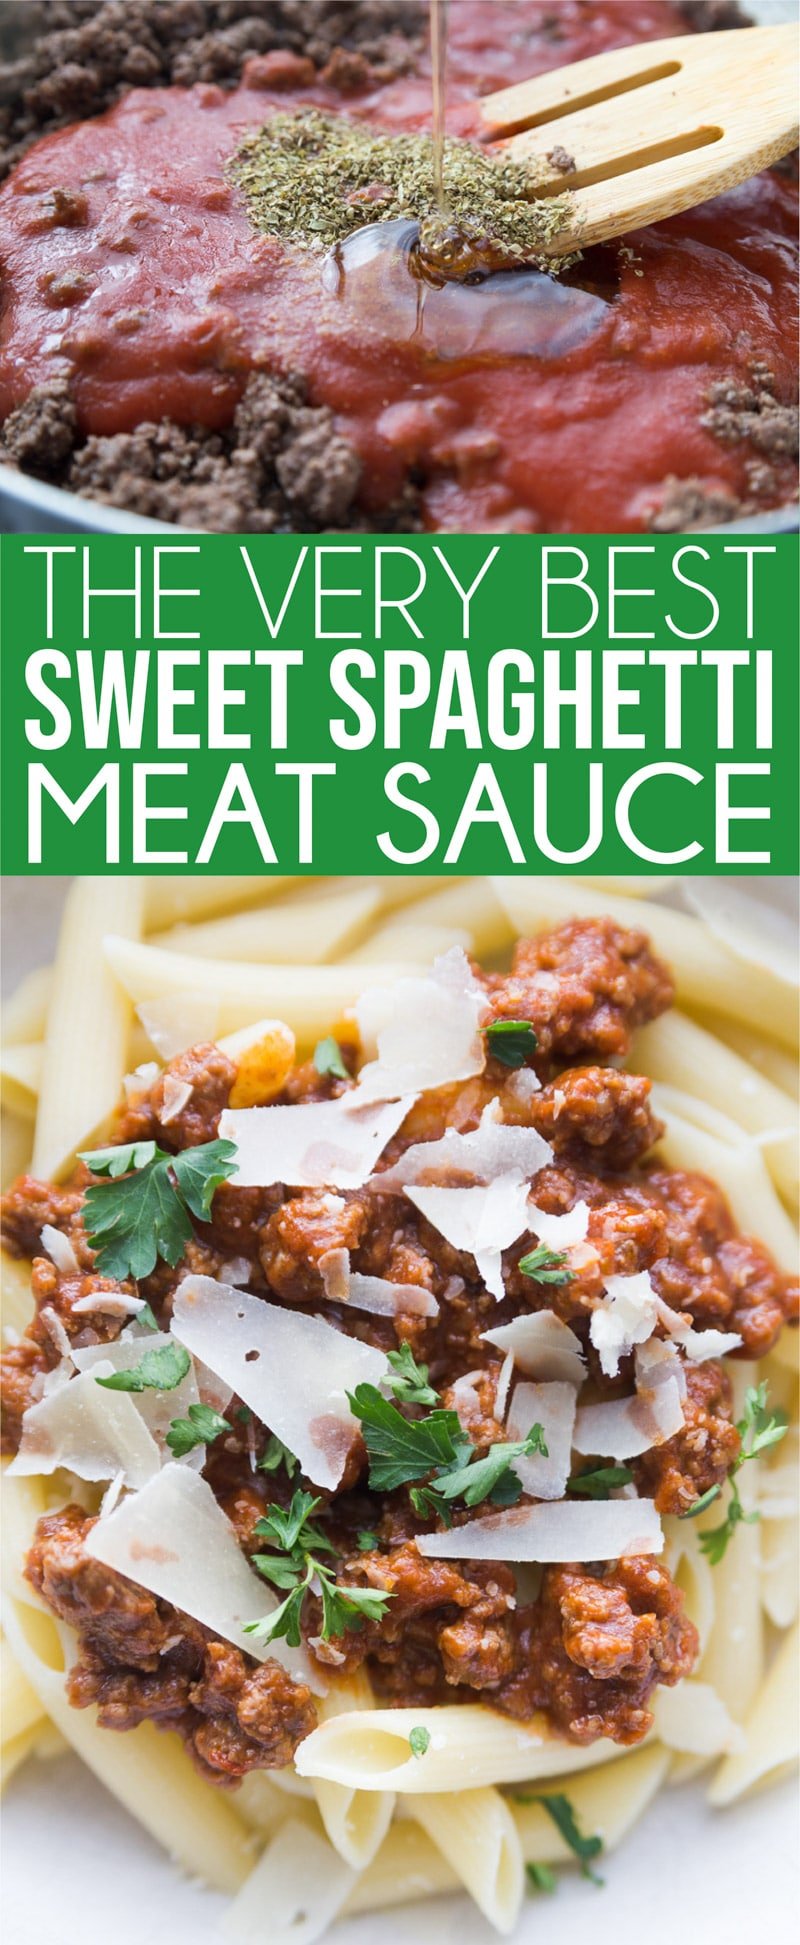 Easy homemade spaghetti sauce that’s sweet, meaty, and absolutely delicious! It’s simple to make from scratch and one of the best healthy Italian sauces I’ve ever tried!